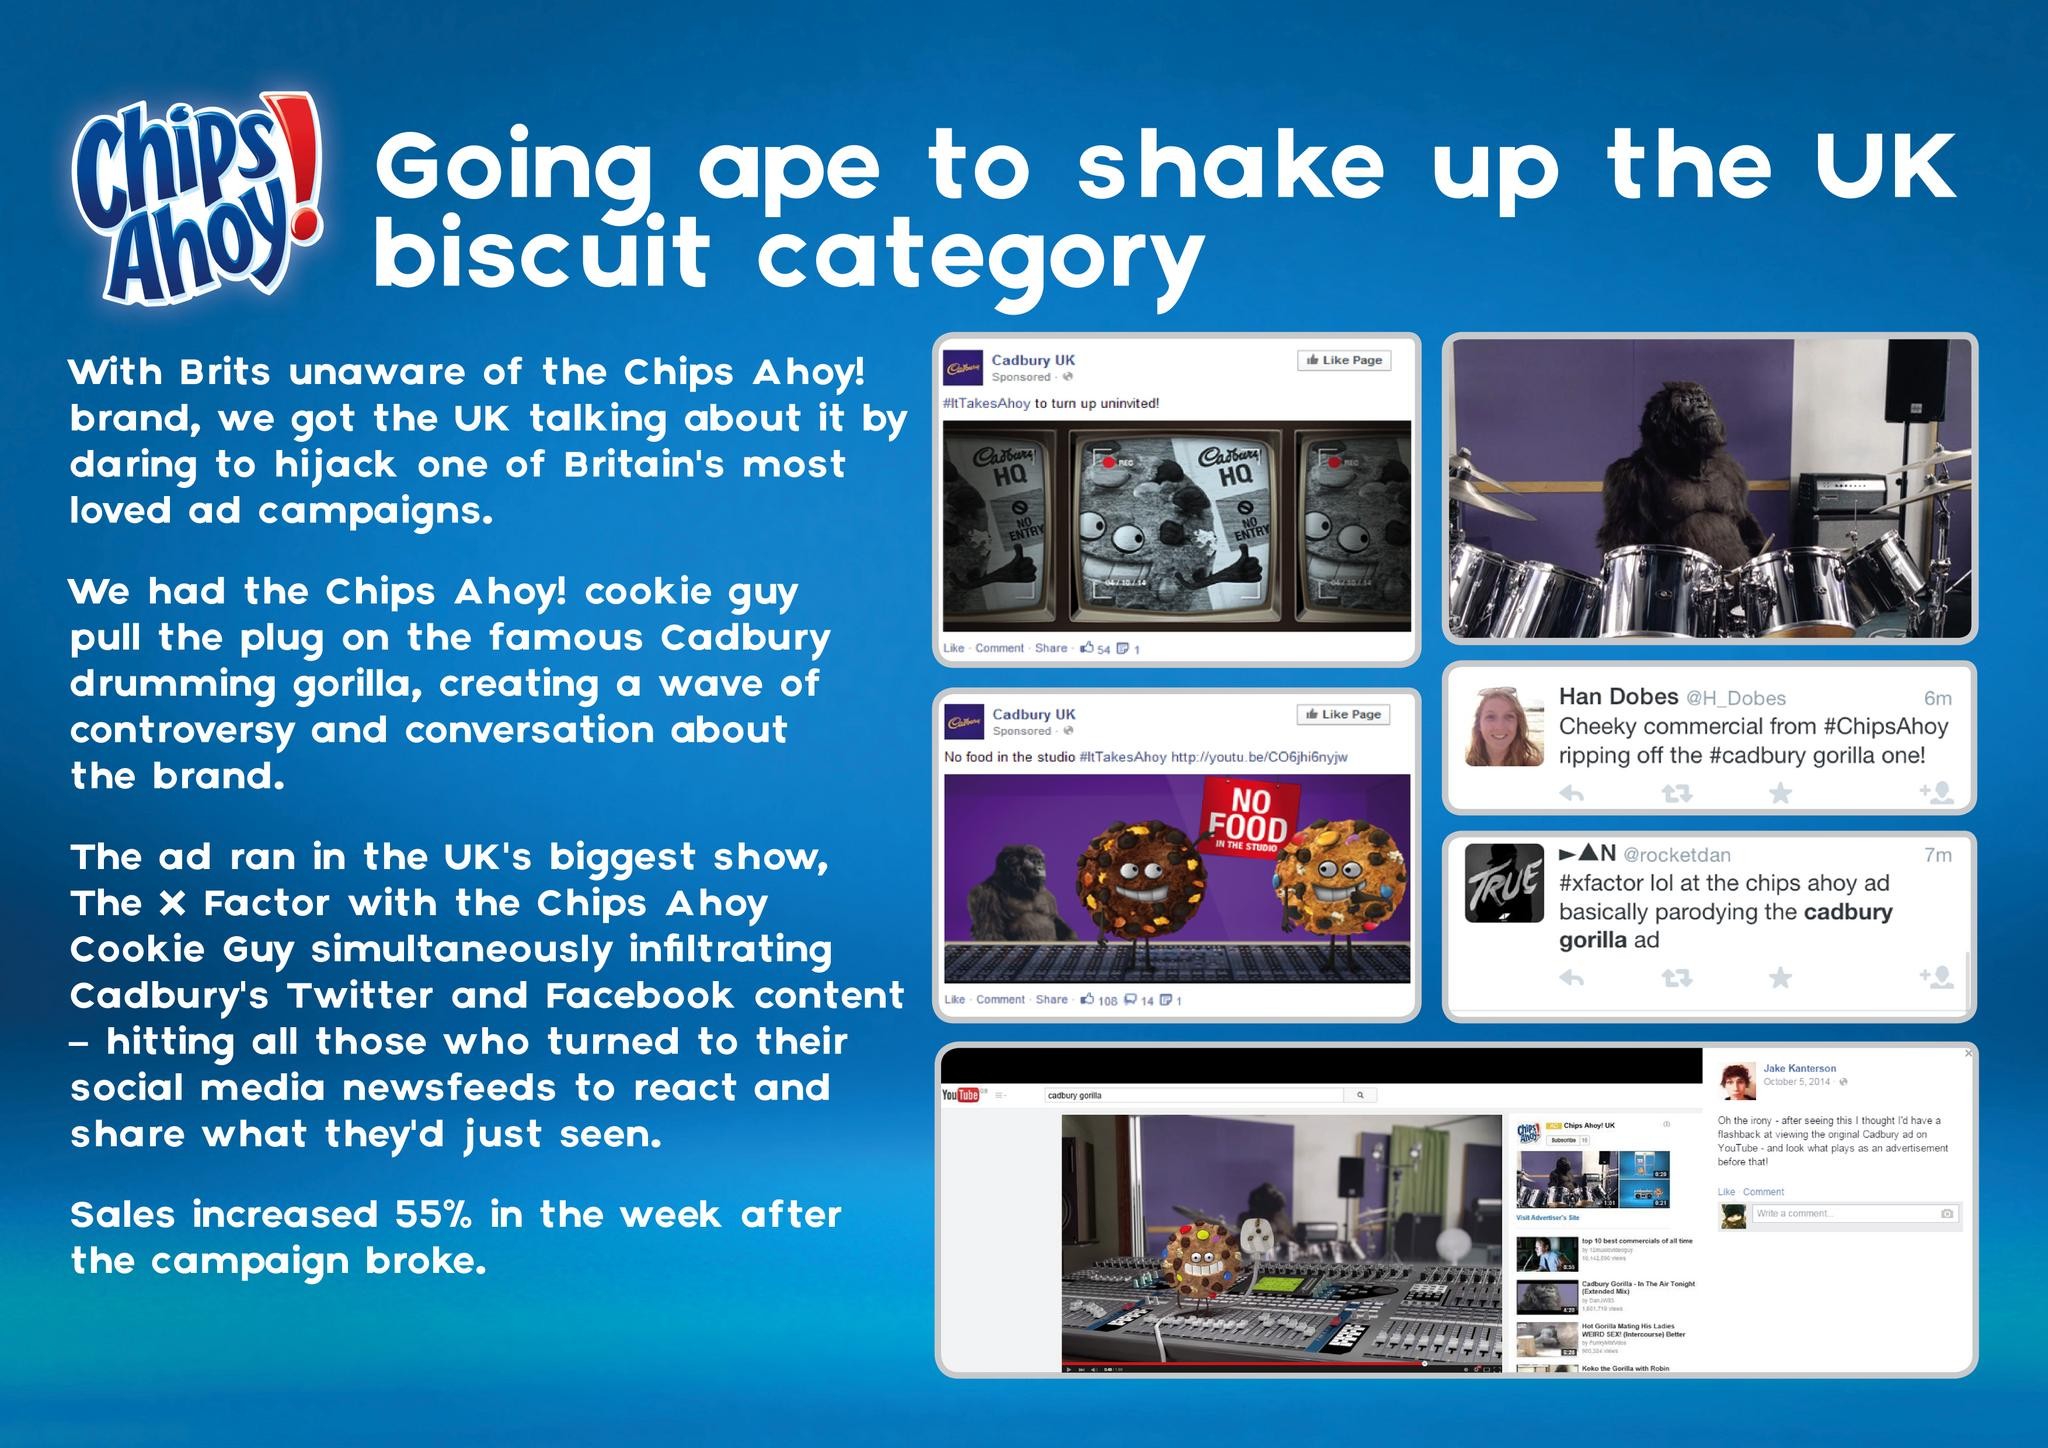 SHAKING UP THE UK BISCUIT CATEGORY BY GOING APE